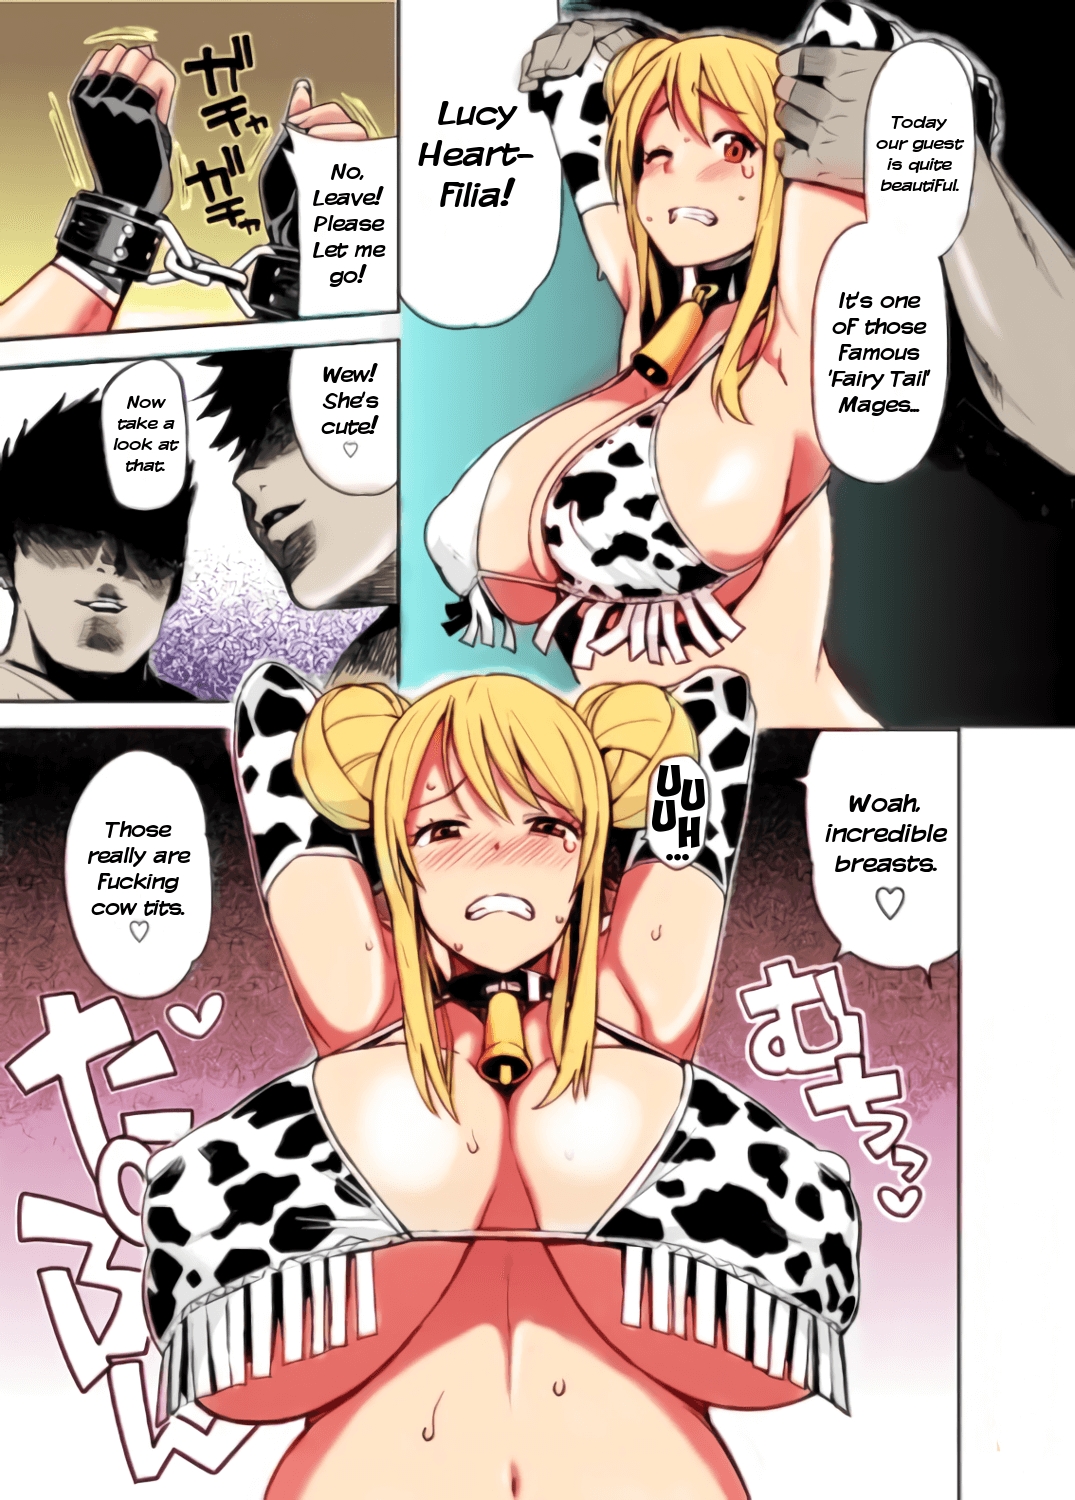 (C89) [Funi Funi Lab (Tamagoro)] Witch Bitch Collection Vol. 1 (Fairy Tail) [English] [#Based Anons] [Colorized] [Incomplete] 1